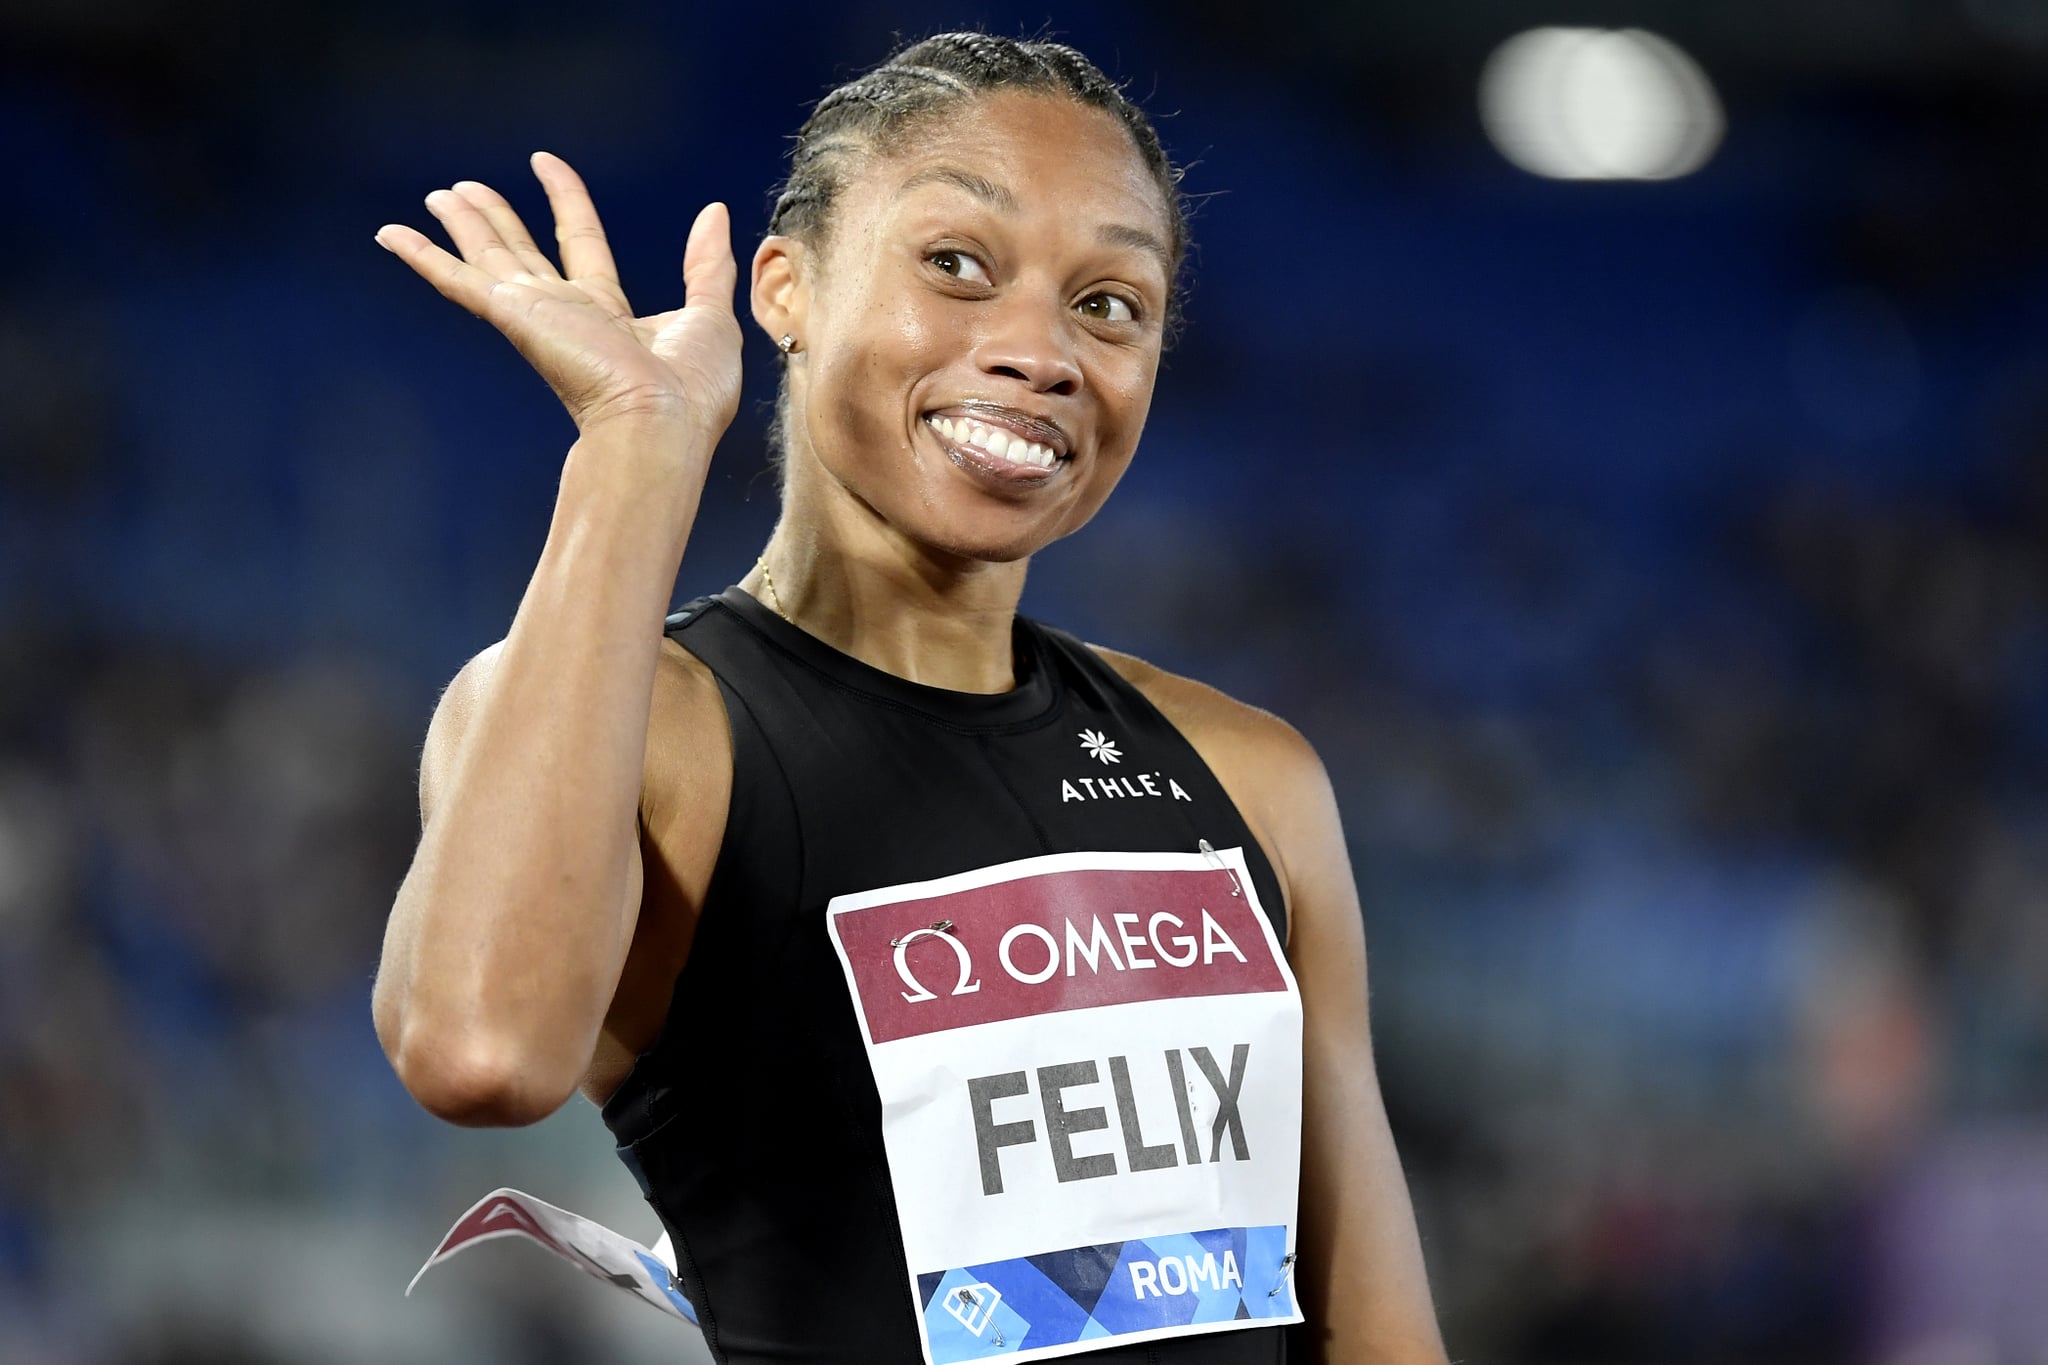 Allyson Felix of United States waves and smiles after compete in the 200m women during the IAAF Diamond League Golden Gala meeting at Olimpic stadium in Rome (Italy), June 9th, 2022. Allyson Felix placed 7th. (Photo by Elianto/Mondadori Portfolio via Getty Images)